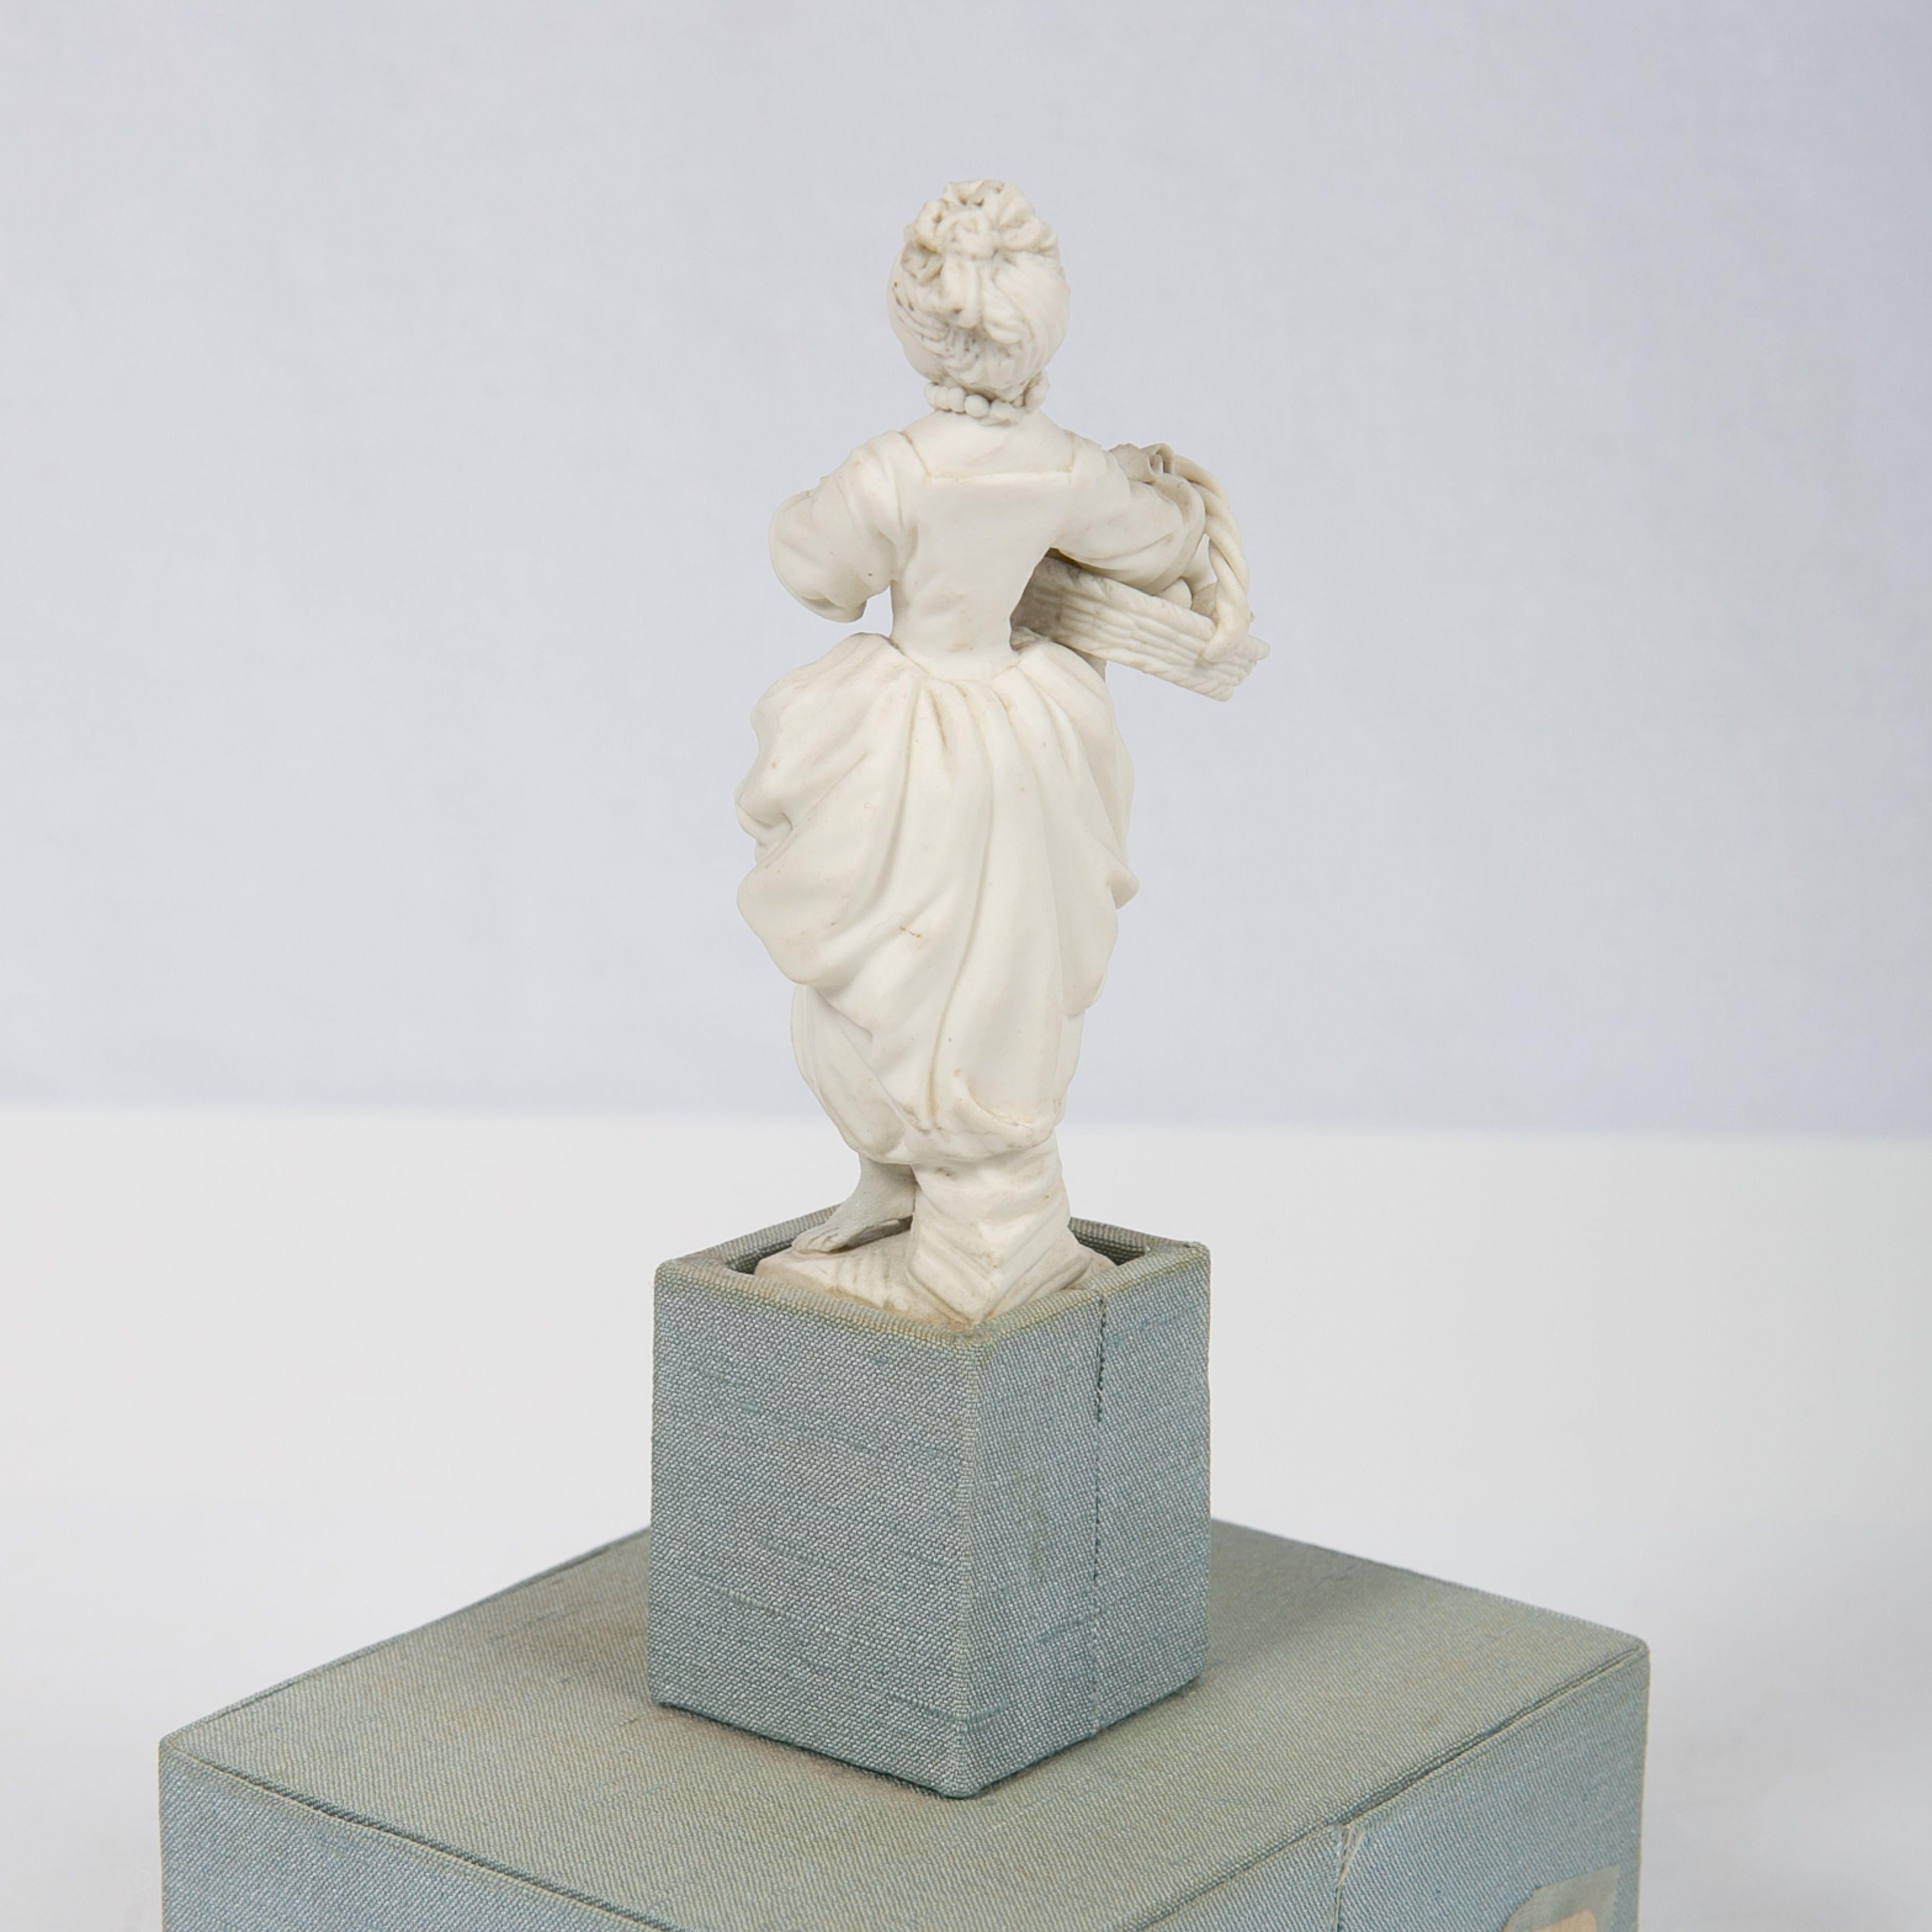 Porcelain Small Bisque Figure of Girl Made by Mennecy in 18th Century France